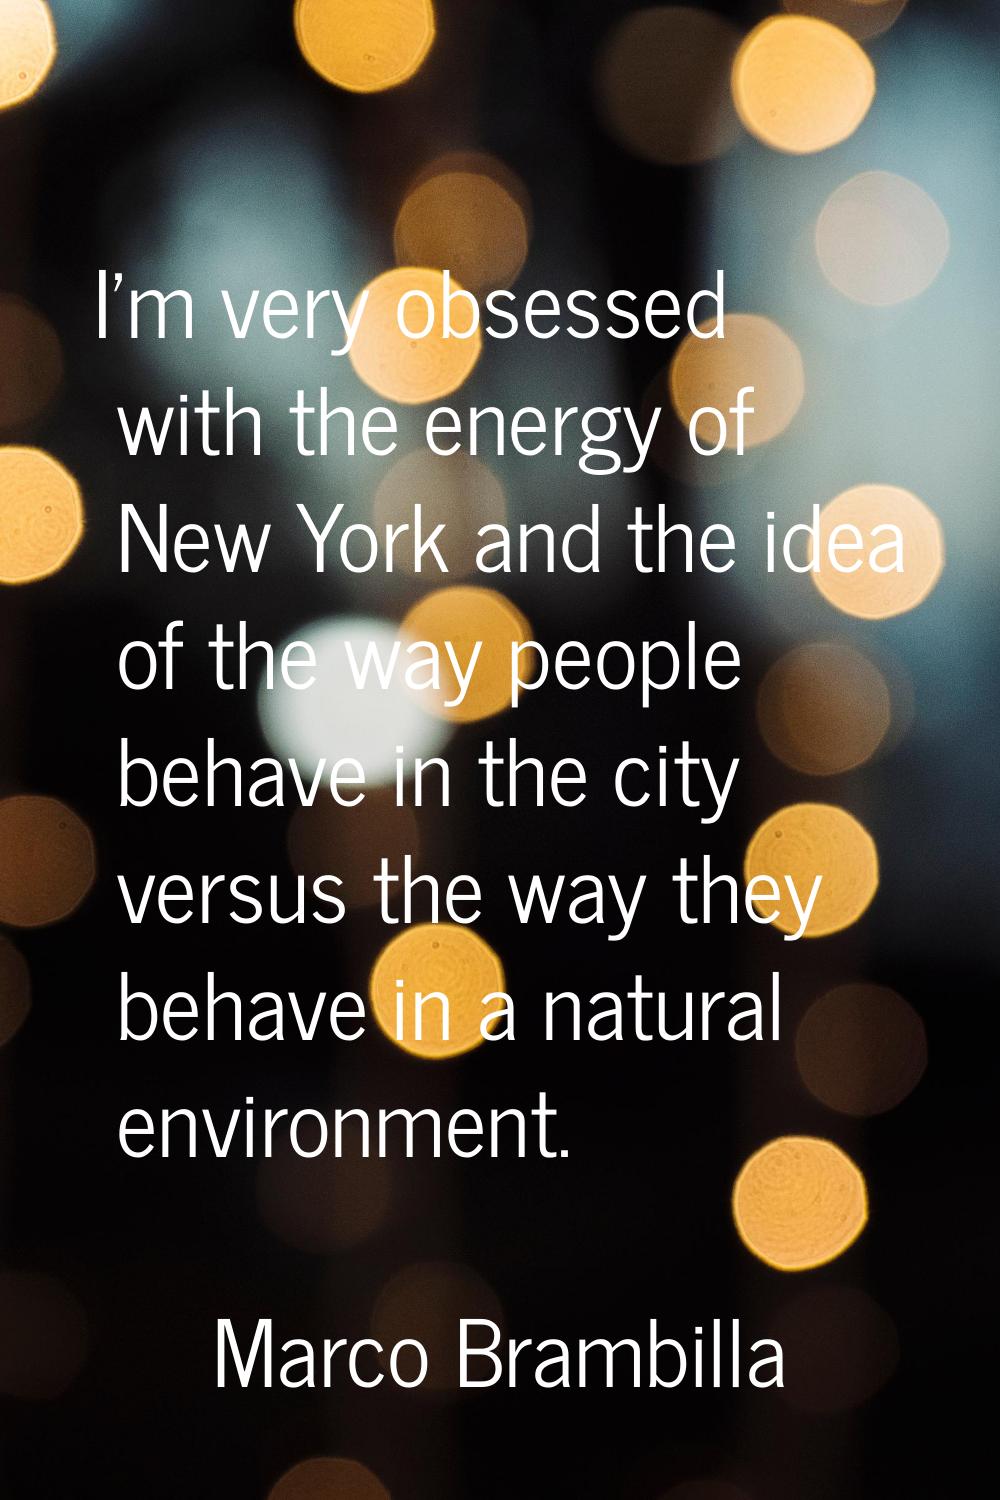 I'm very obsessed with the energy of New York and the idea of the way people behave in the city ver